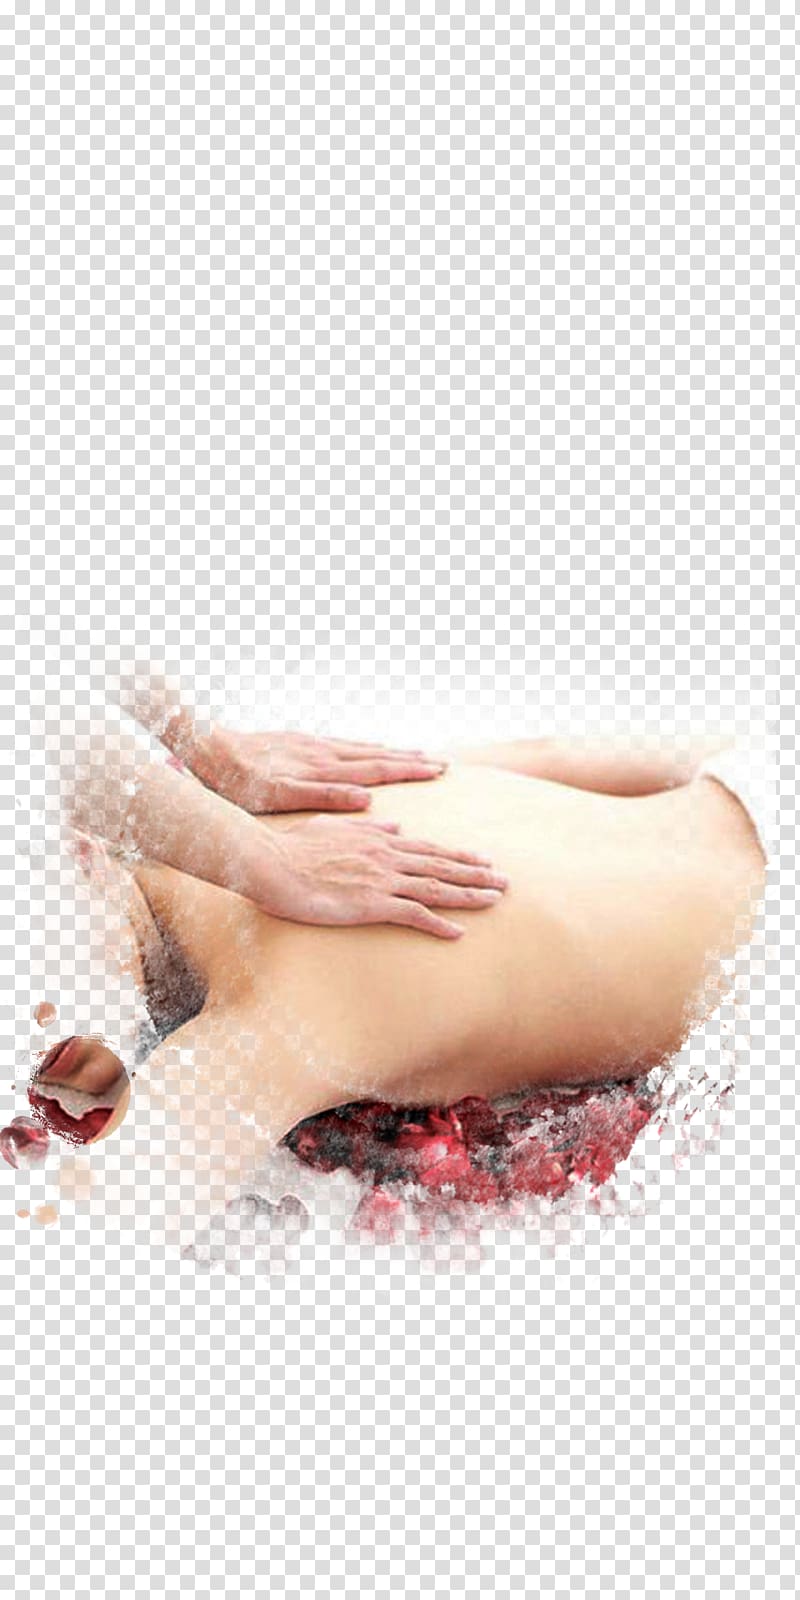 person touching the back of person while lying down, Massage Icon, Massage People transparent background PNG clipart